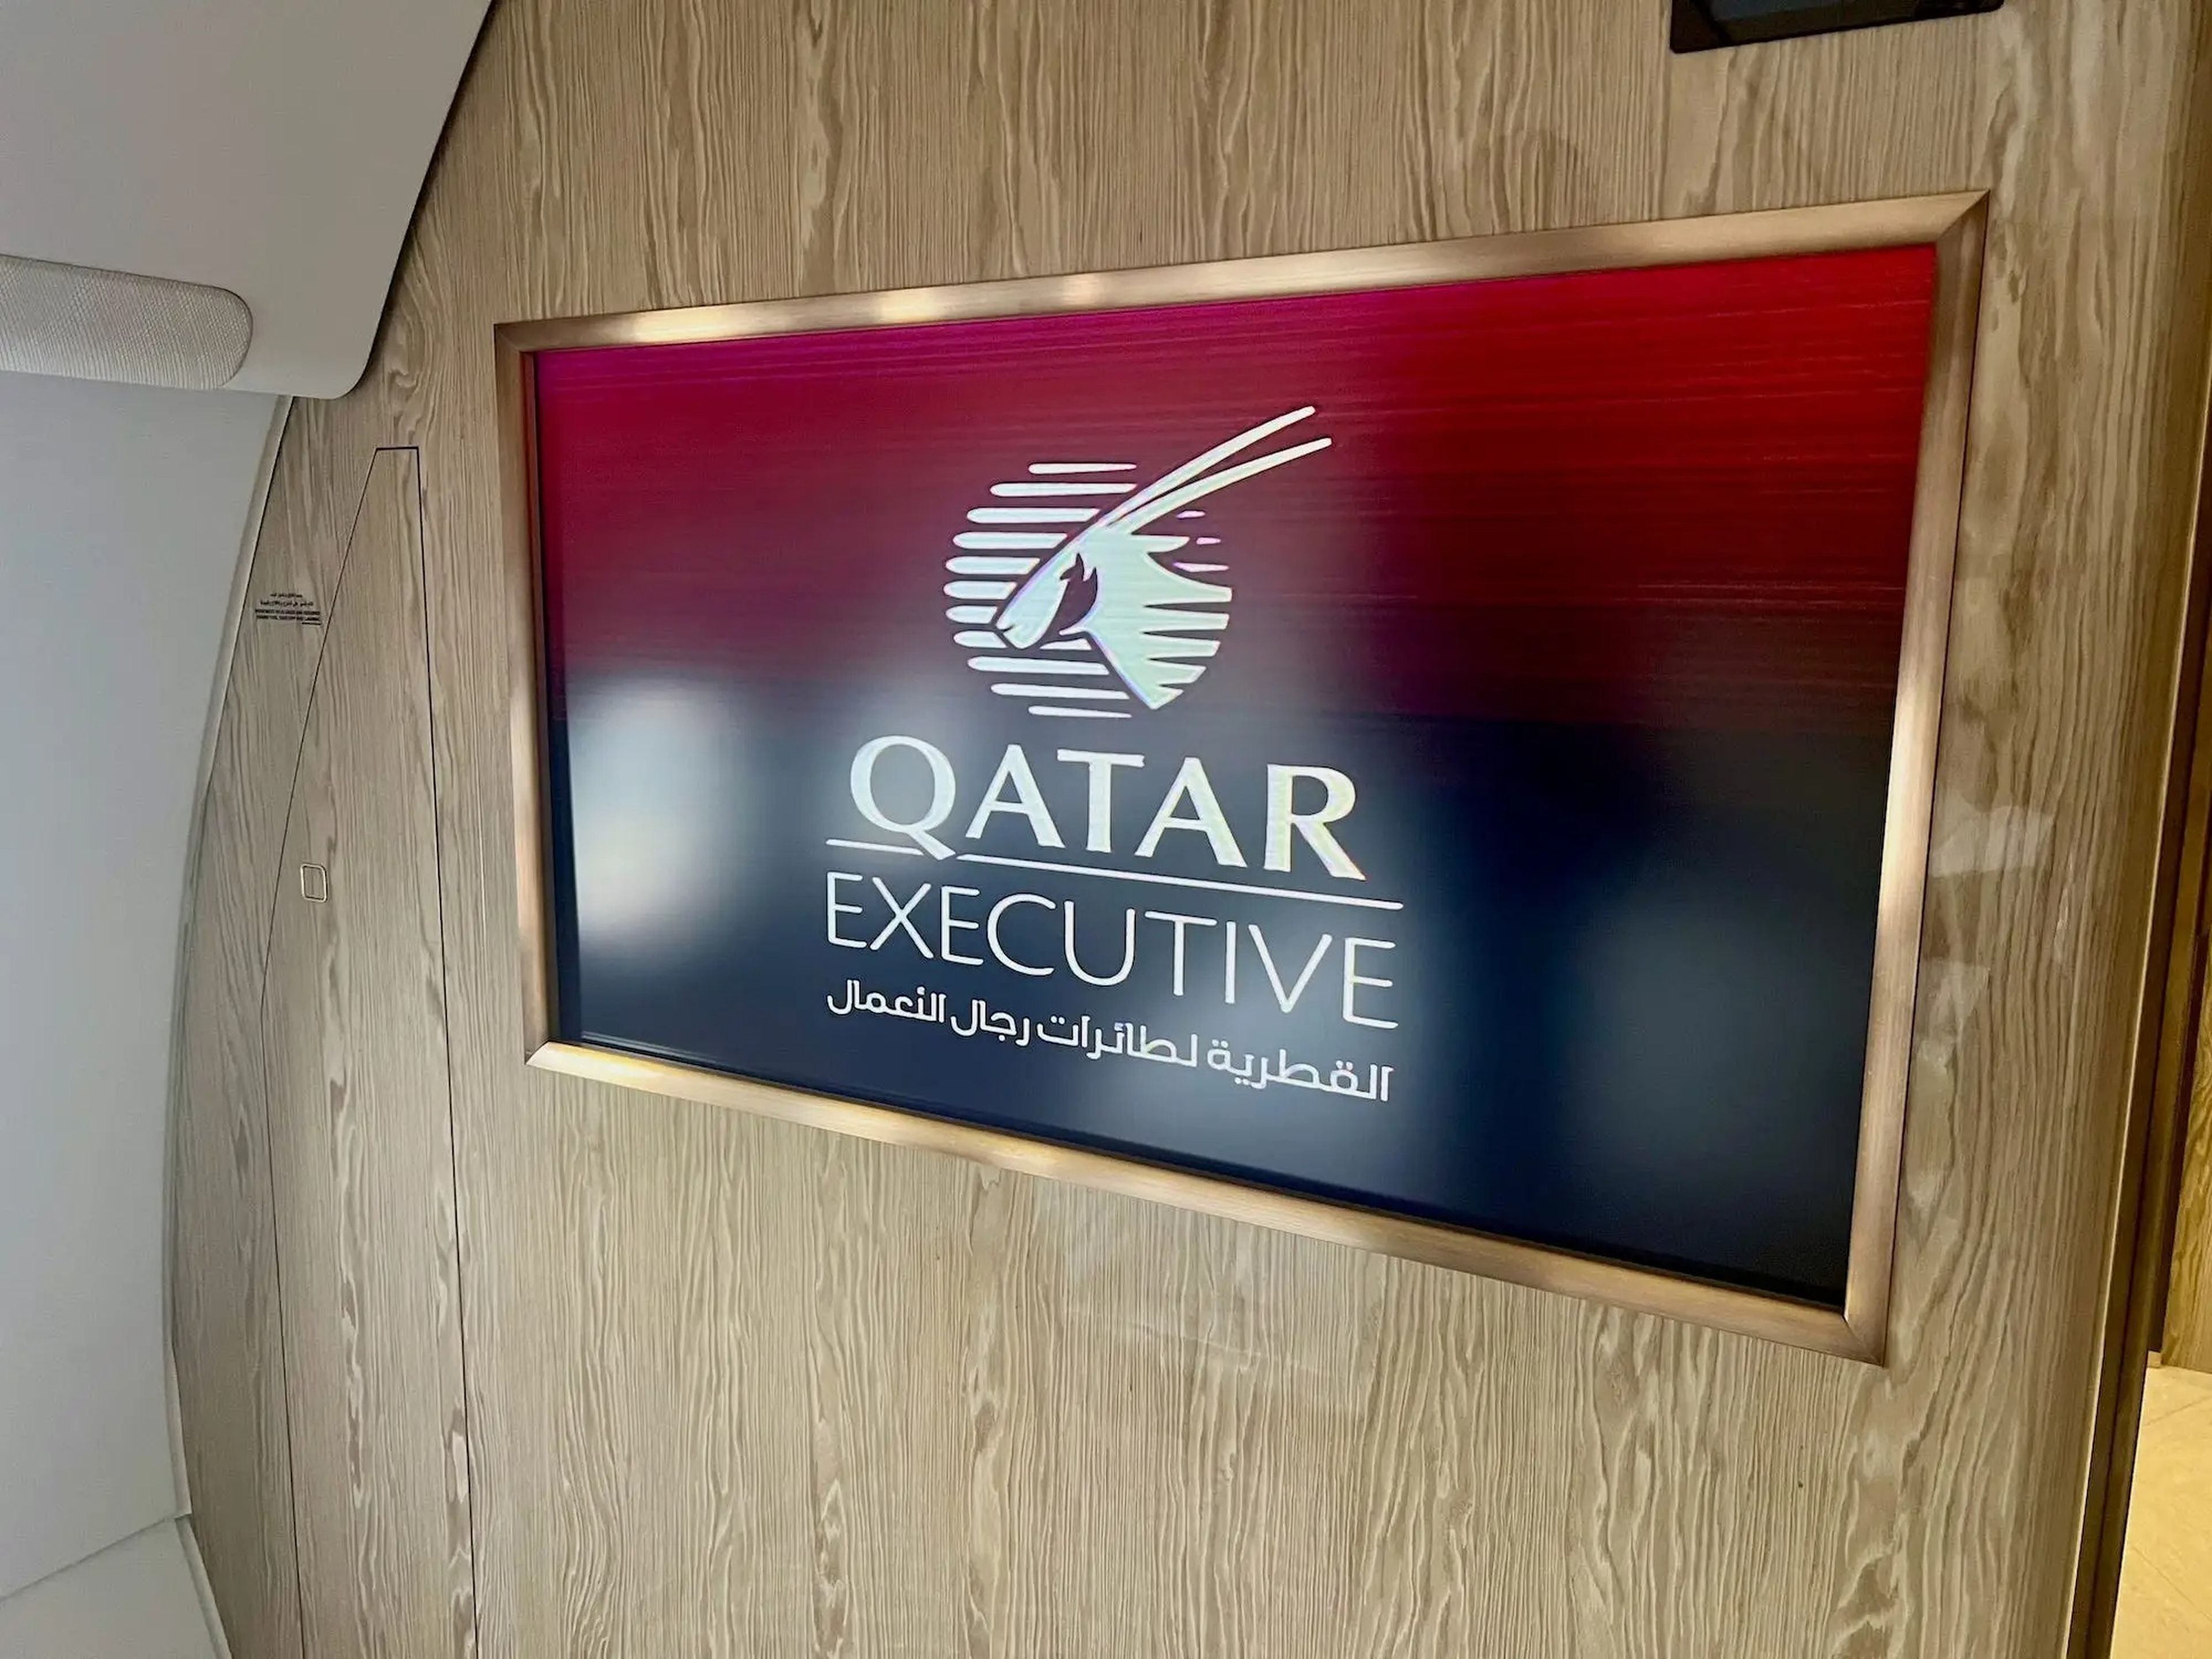 The TV with the Qatar Executive logo and branding displayed on the screen.